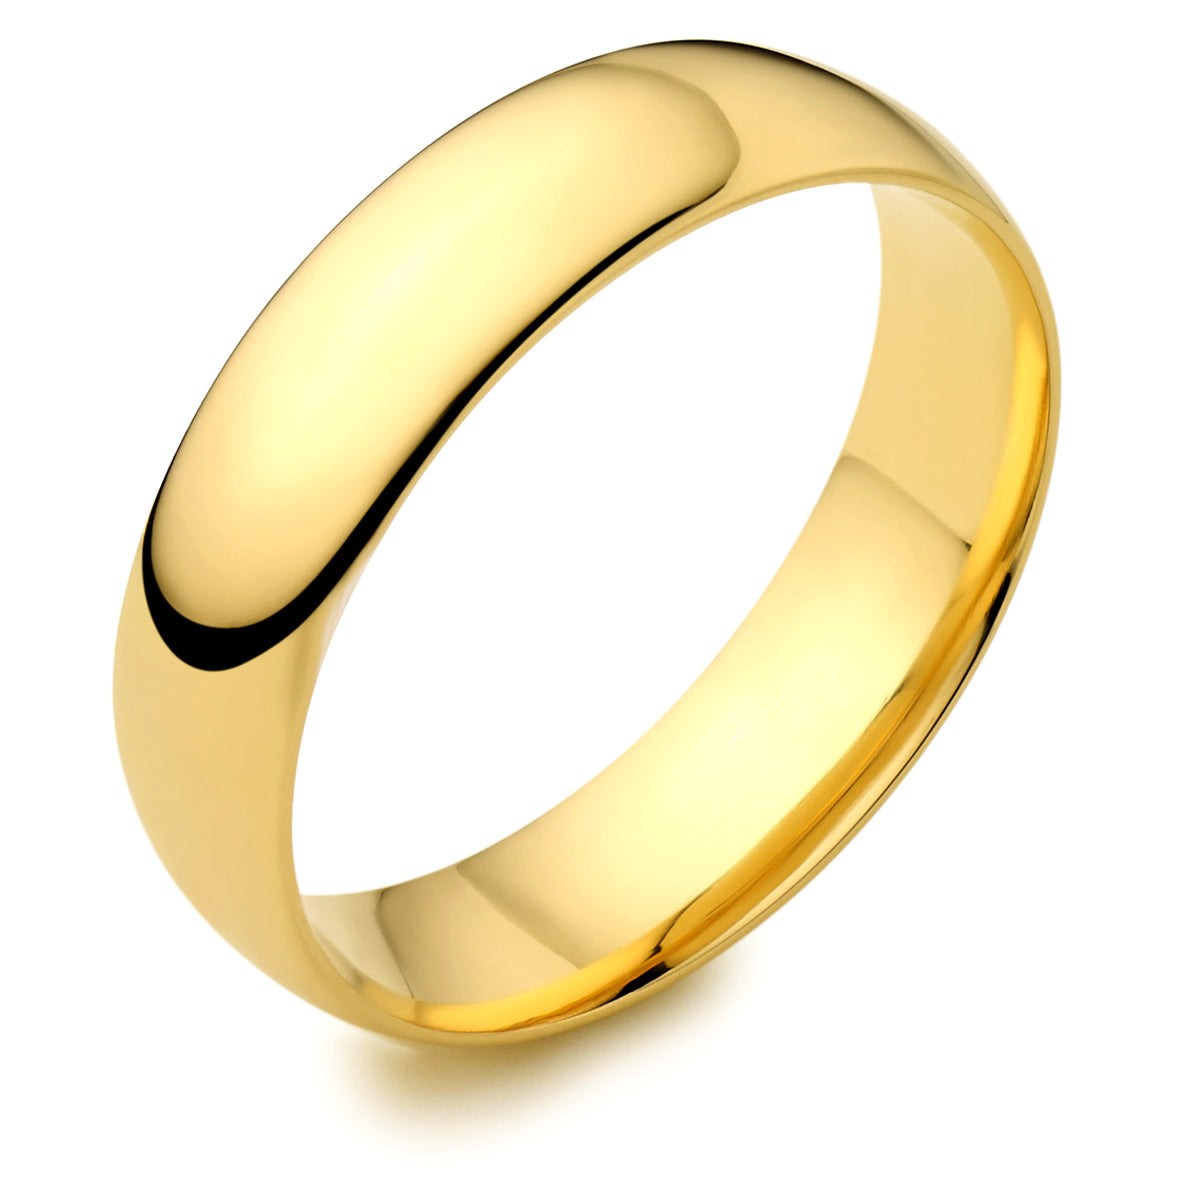 Men's 9ct Yellow Gold 6mm Stand Court Wedding Ring